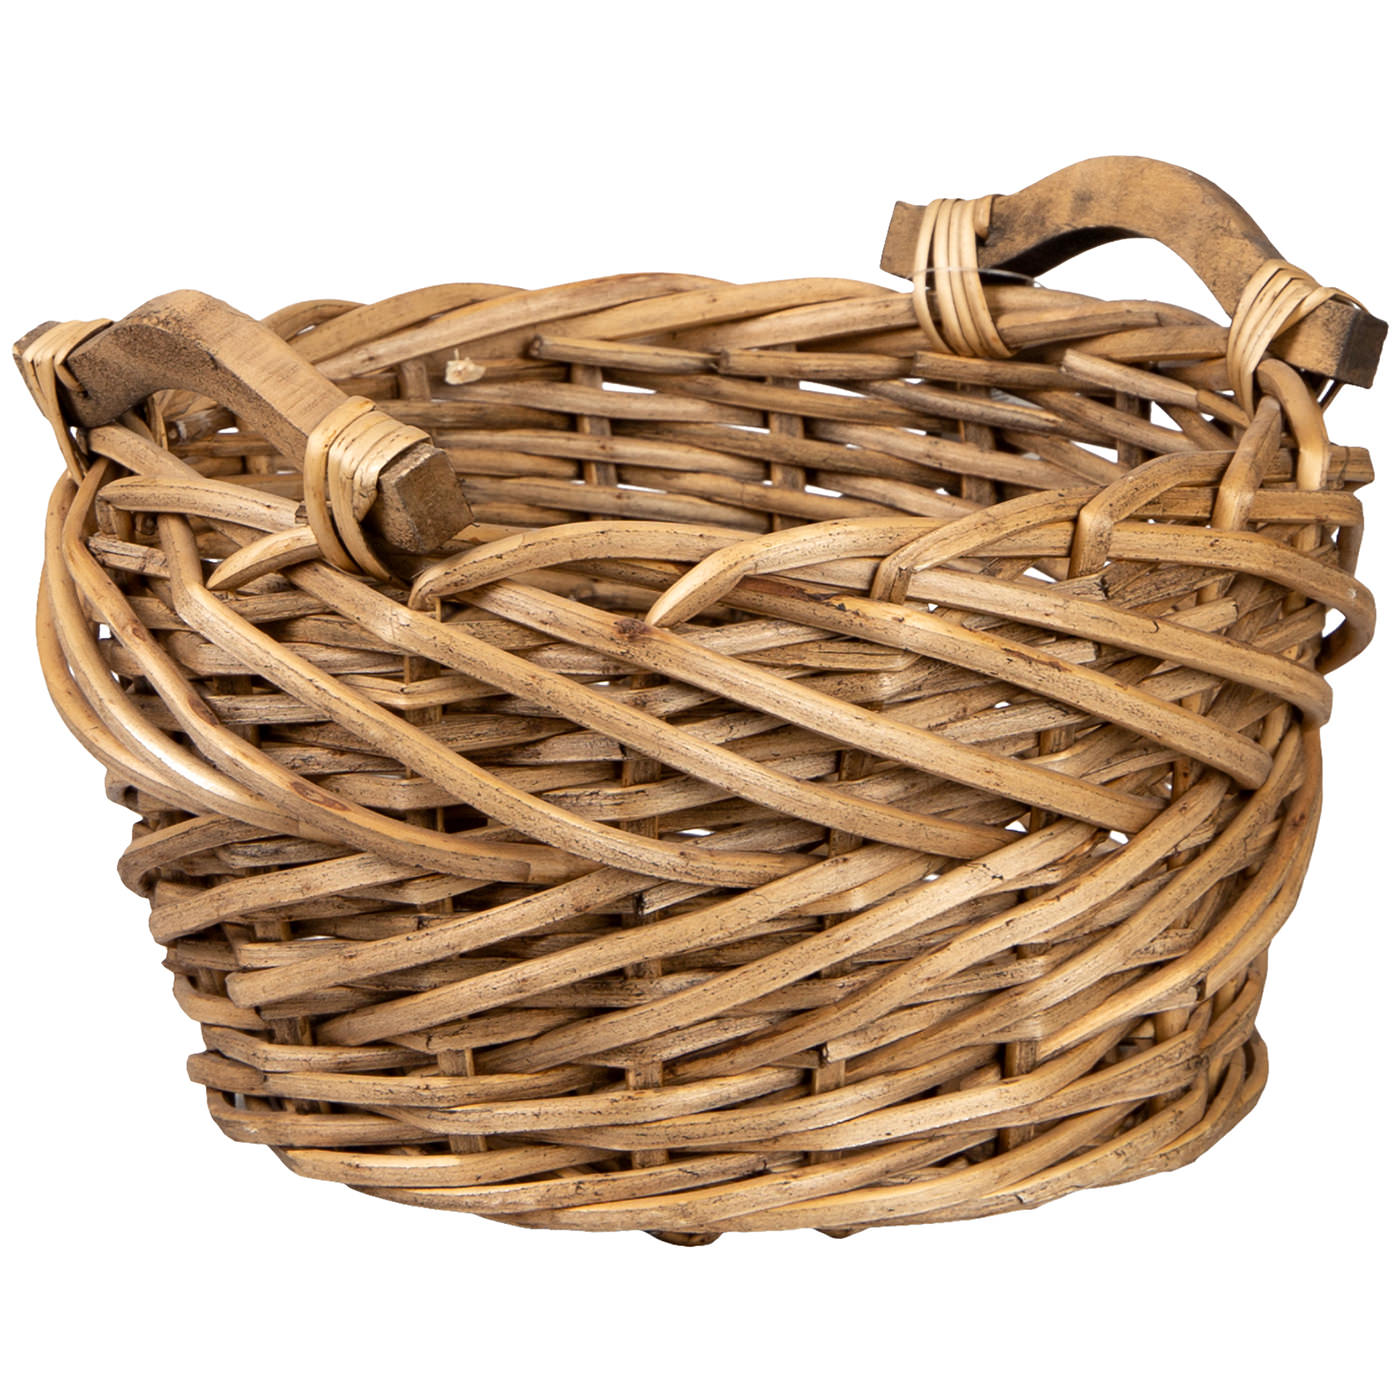 5Q 1133 105 6 Basket Willow Small WoodBrown 2